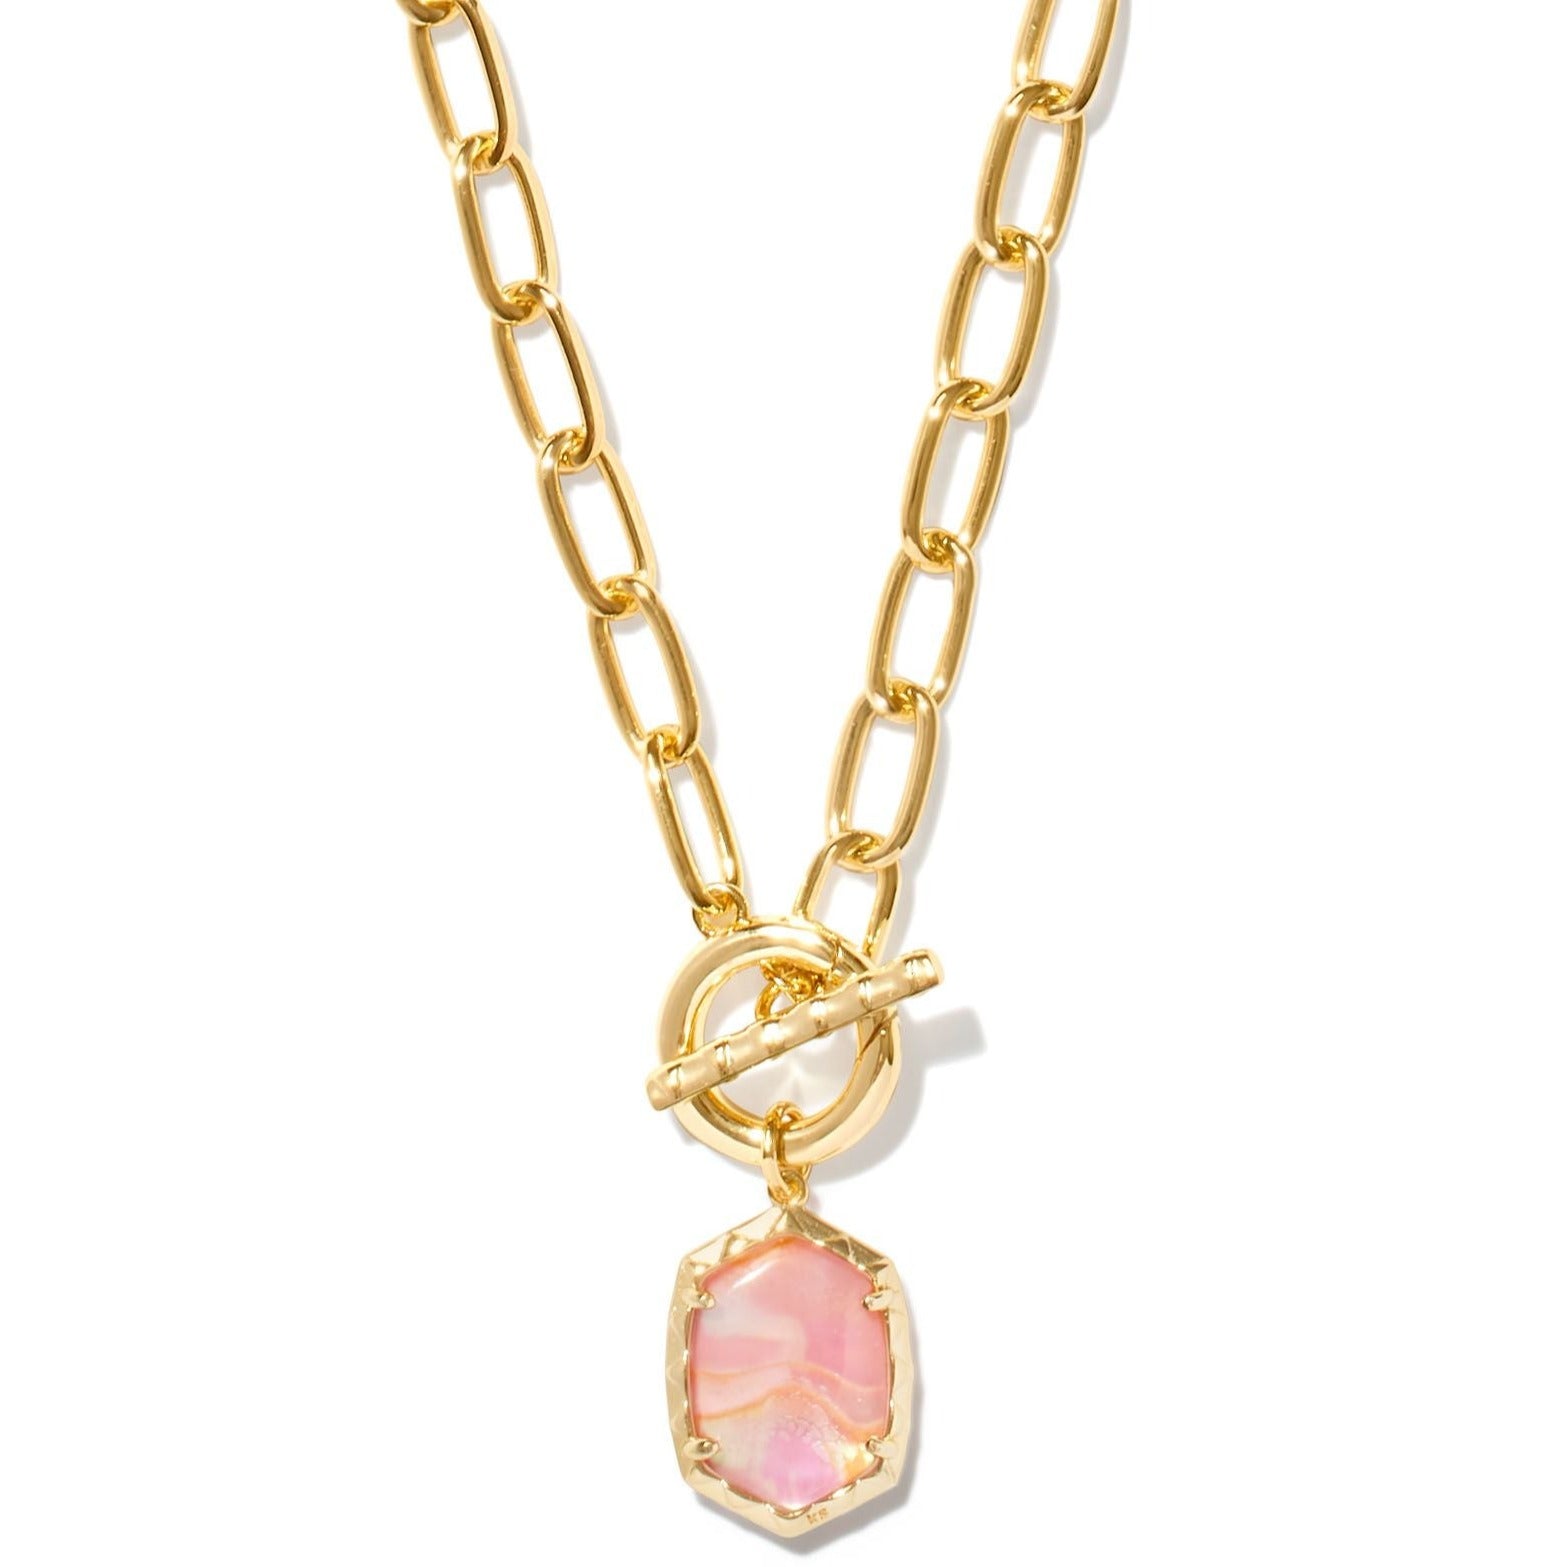 Kendra Scott | Daphne Gold Link and Chain Necklace in Light Pink Iridescent Abalone - Giddy Up Glamour Boutique